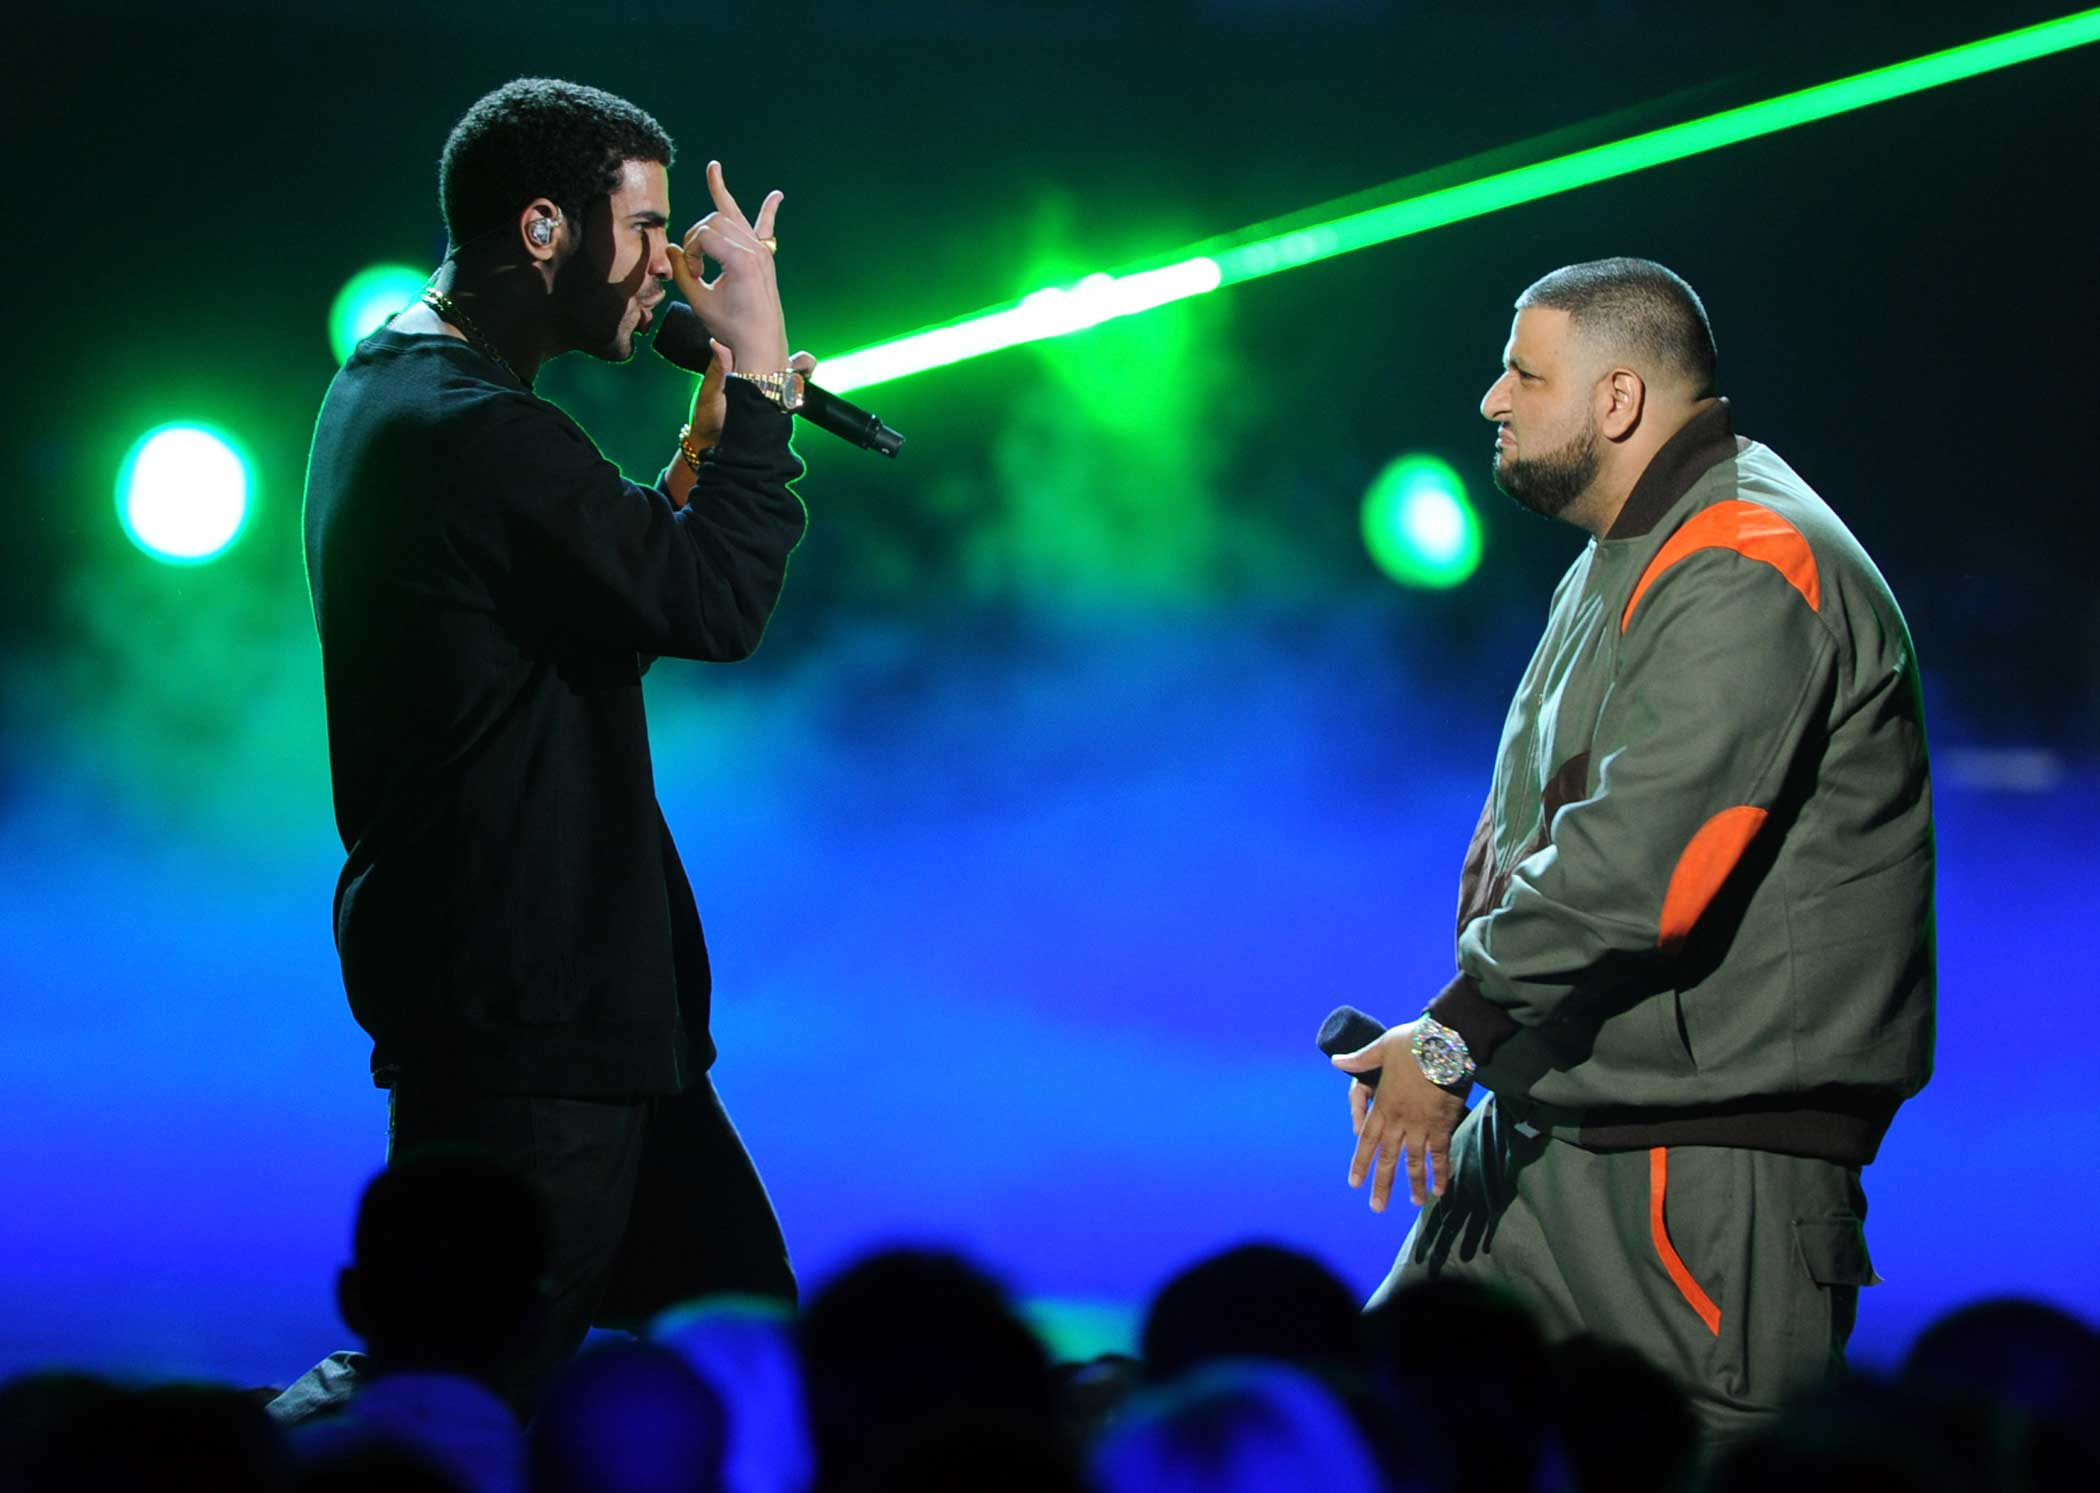 Drake appeared on two of rapper and producer DJ Khaled’s biggest hits: “I’m On One” in 2011 and “No New Friends” in 2013.